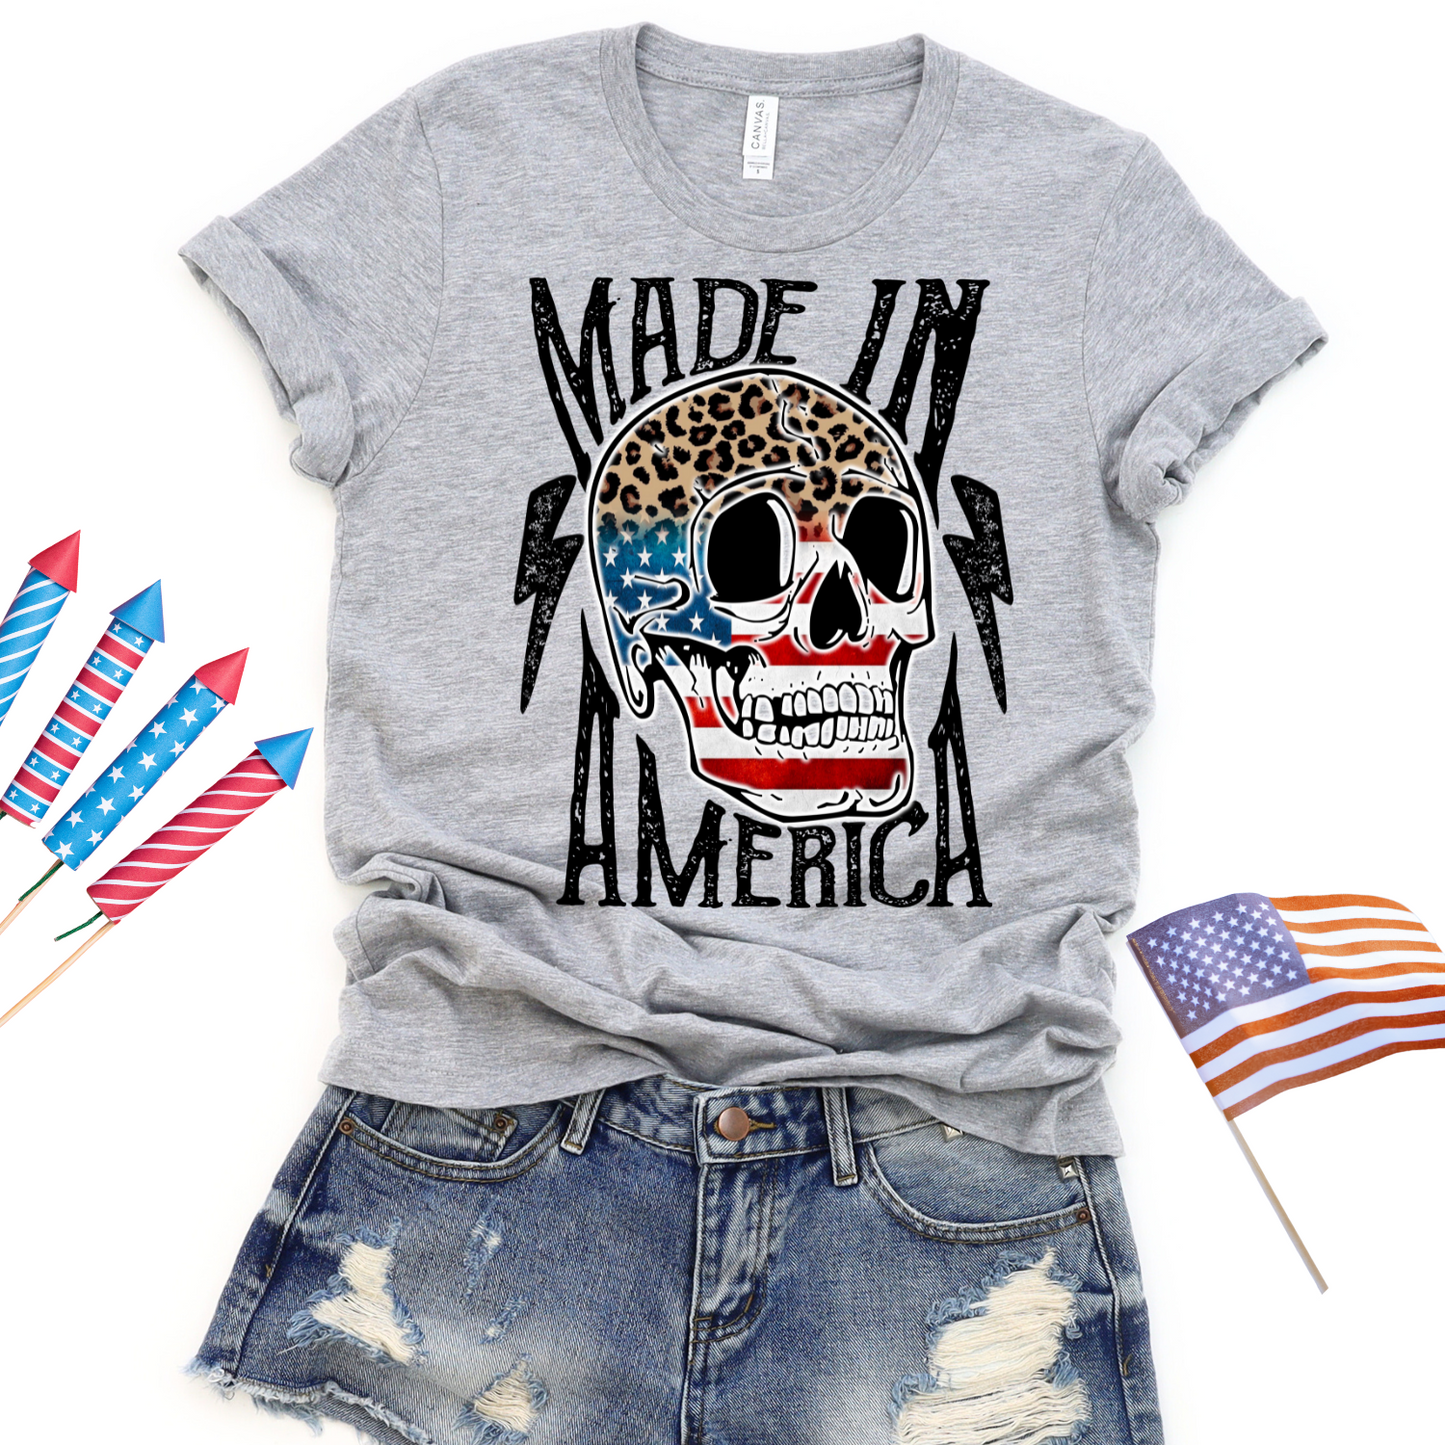 Made In America Graphic Tee